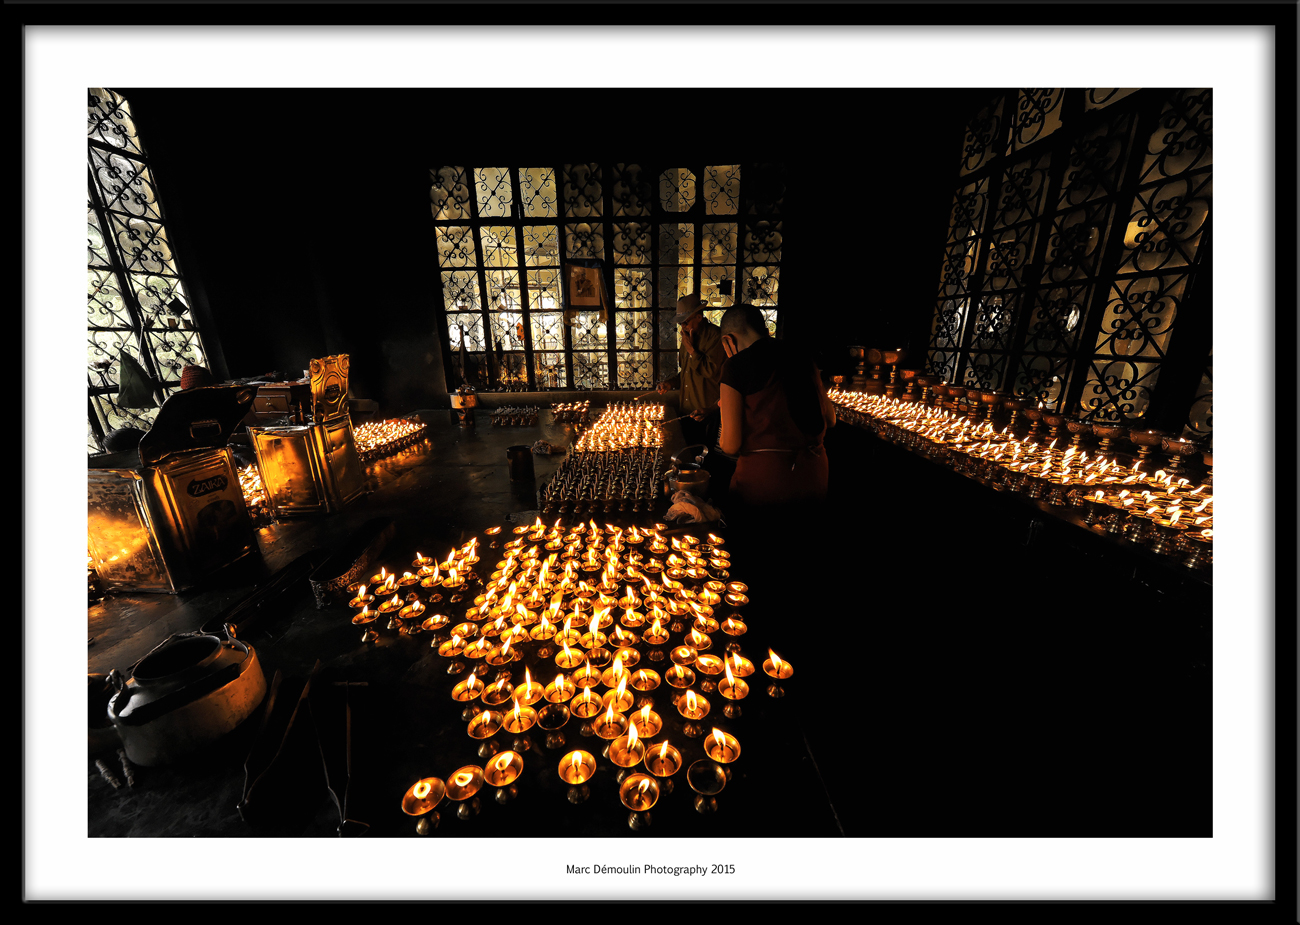 Candles room in the Tsuglagkhang temple, Dharamsala, India 2015